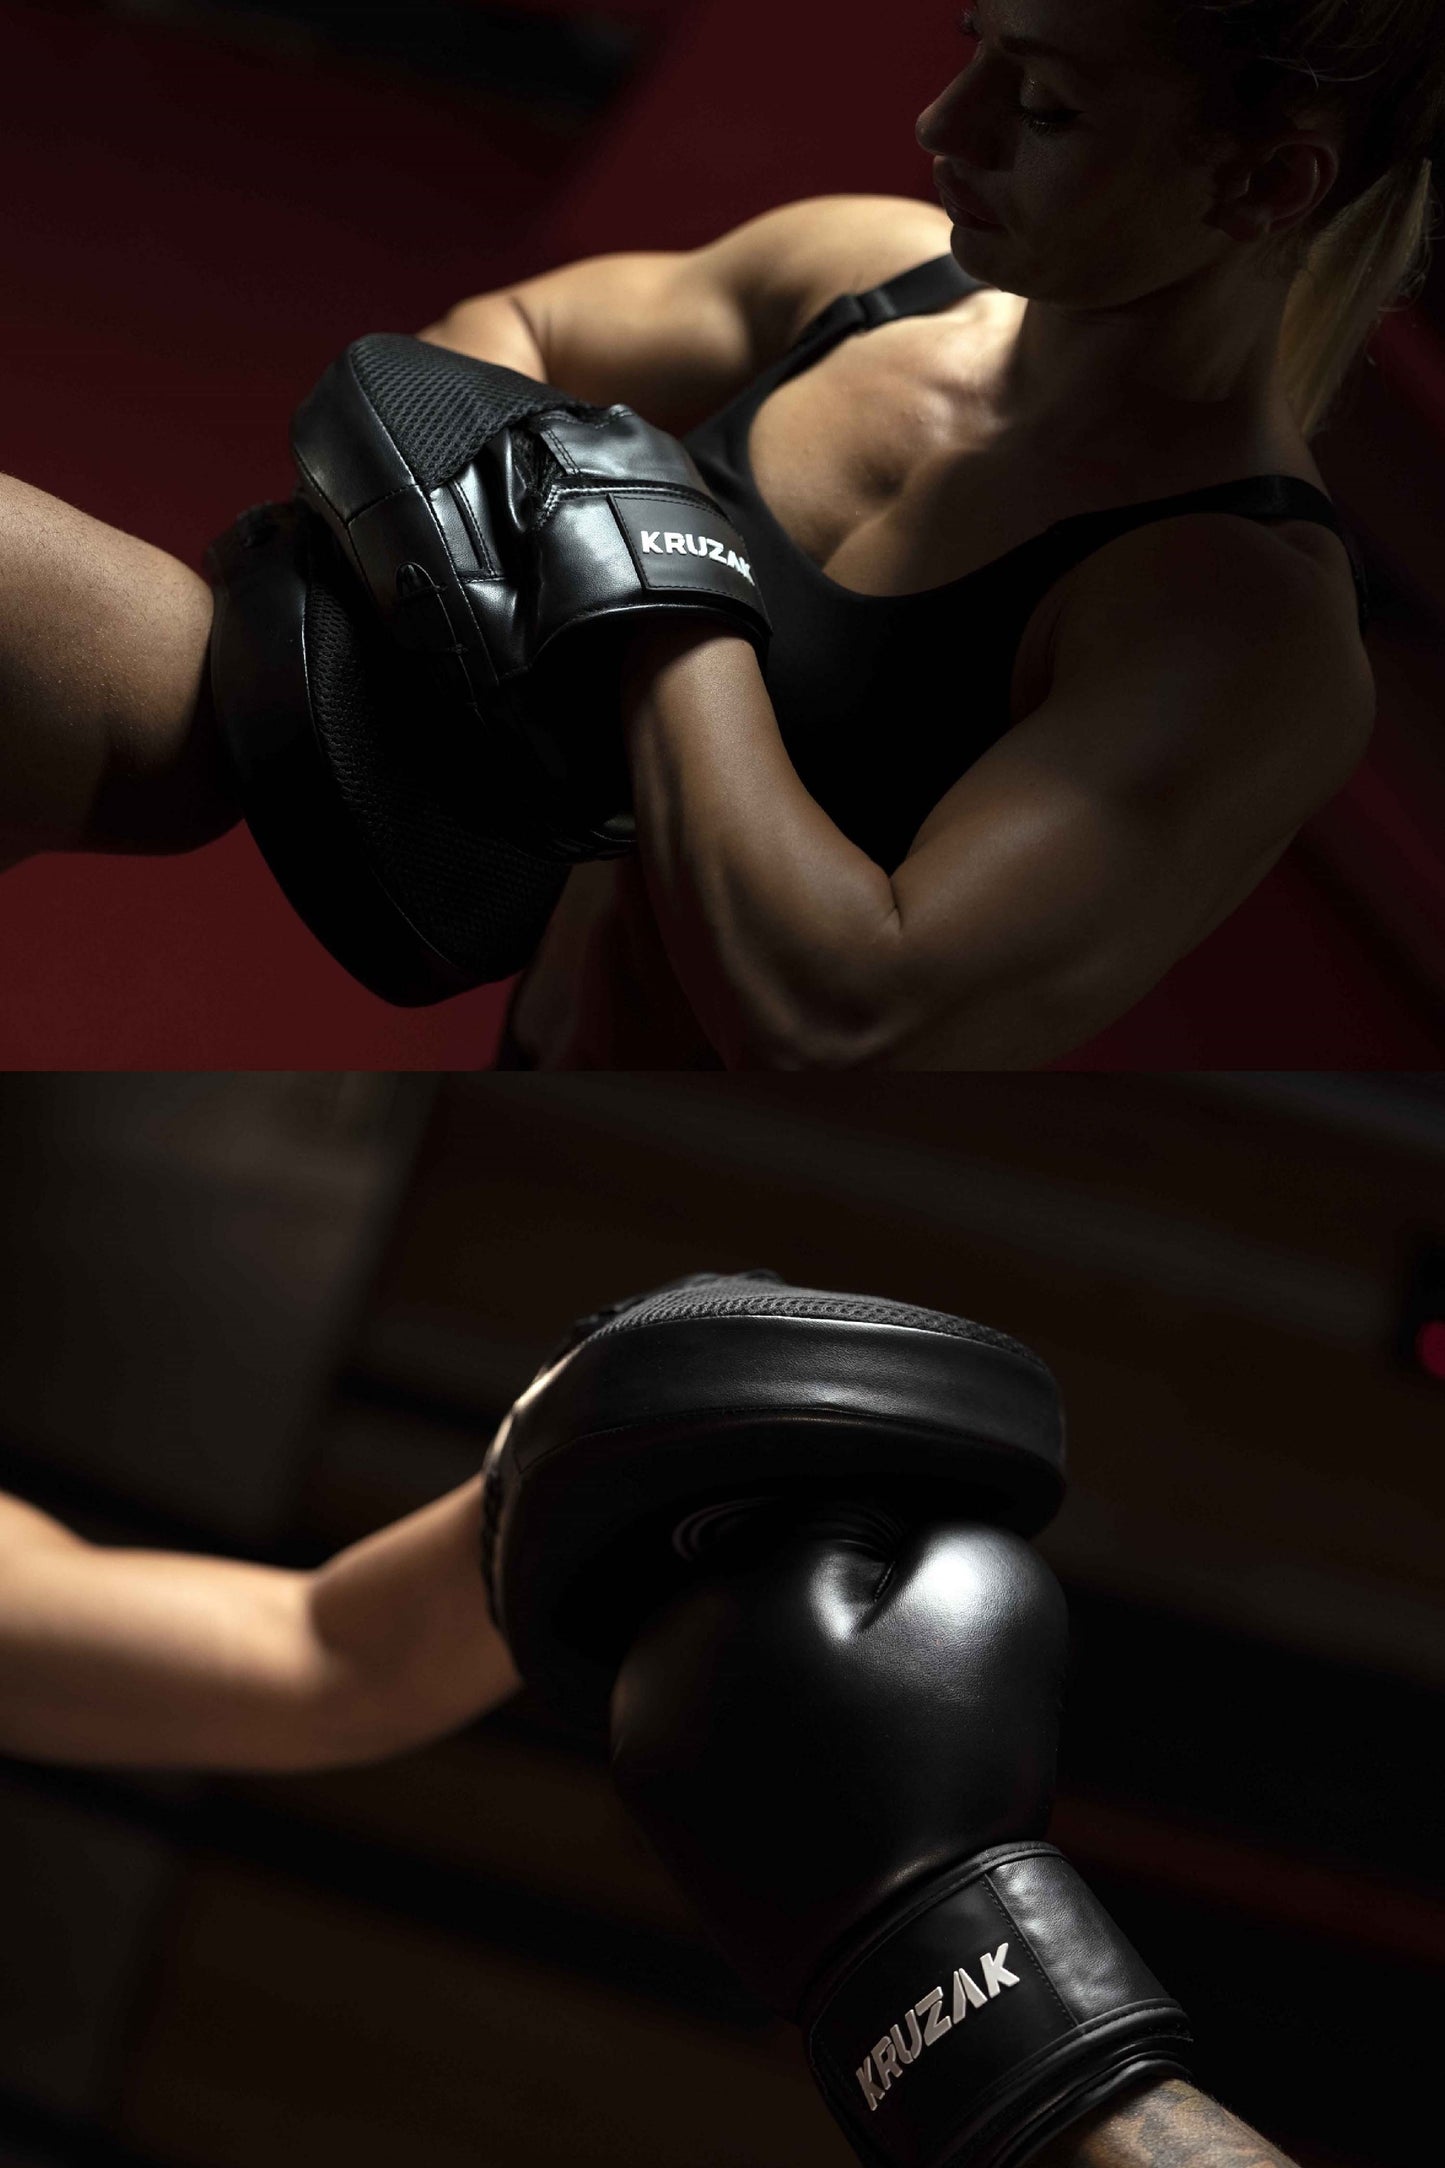 Product demonstration of Kruzak Unisex Black Boxing Gloves and Focus Pads